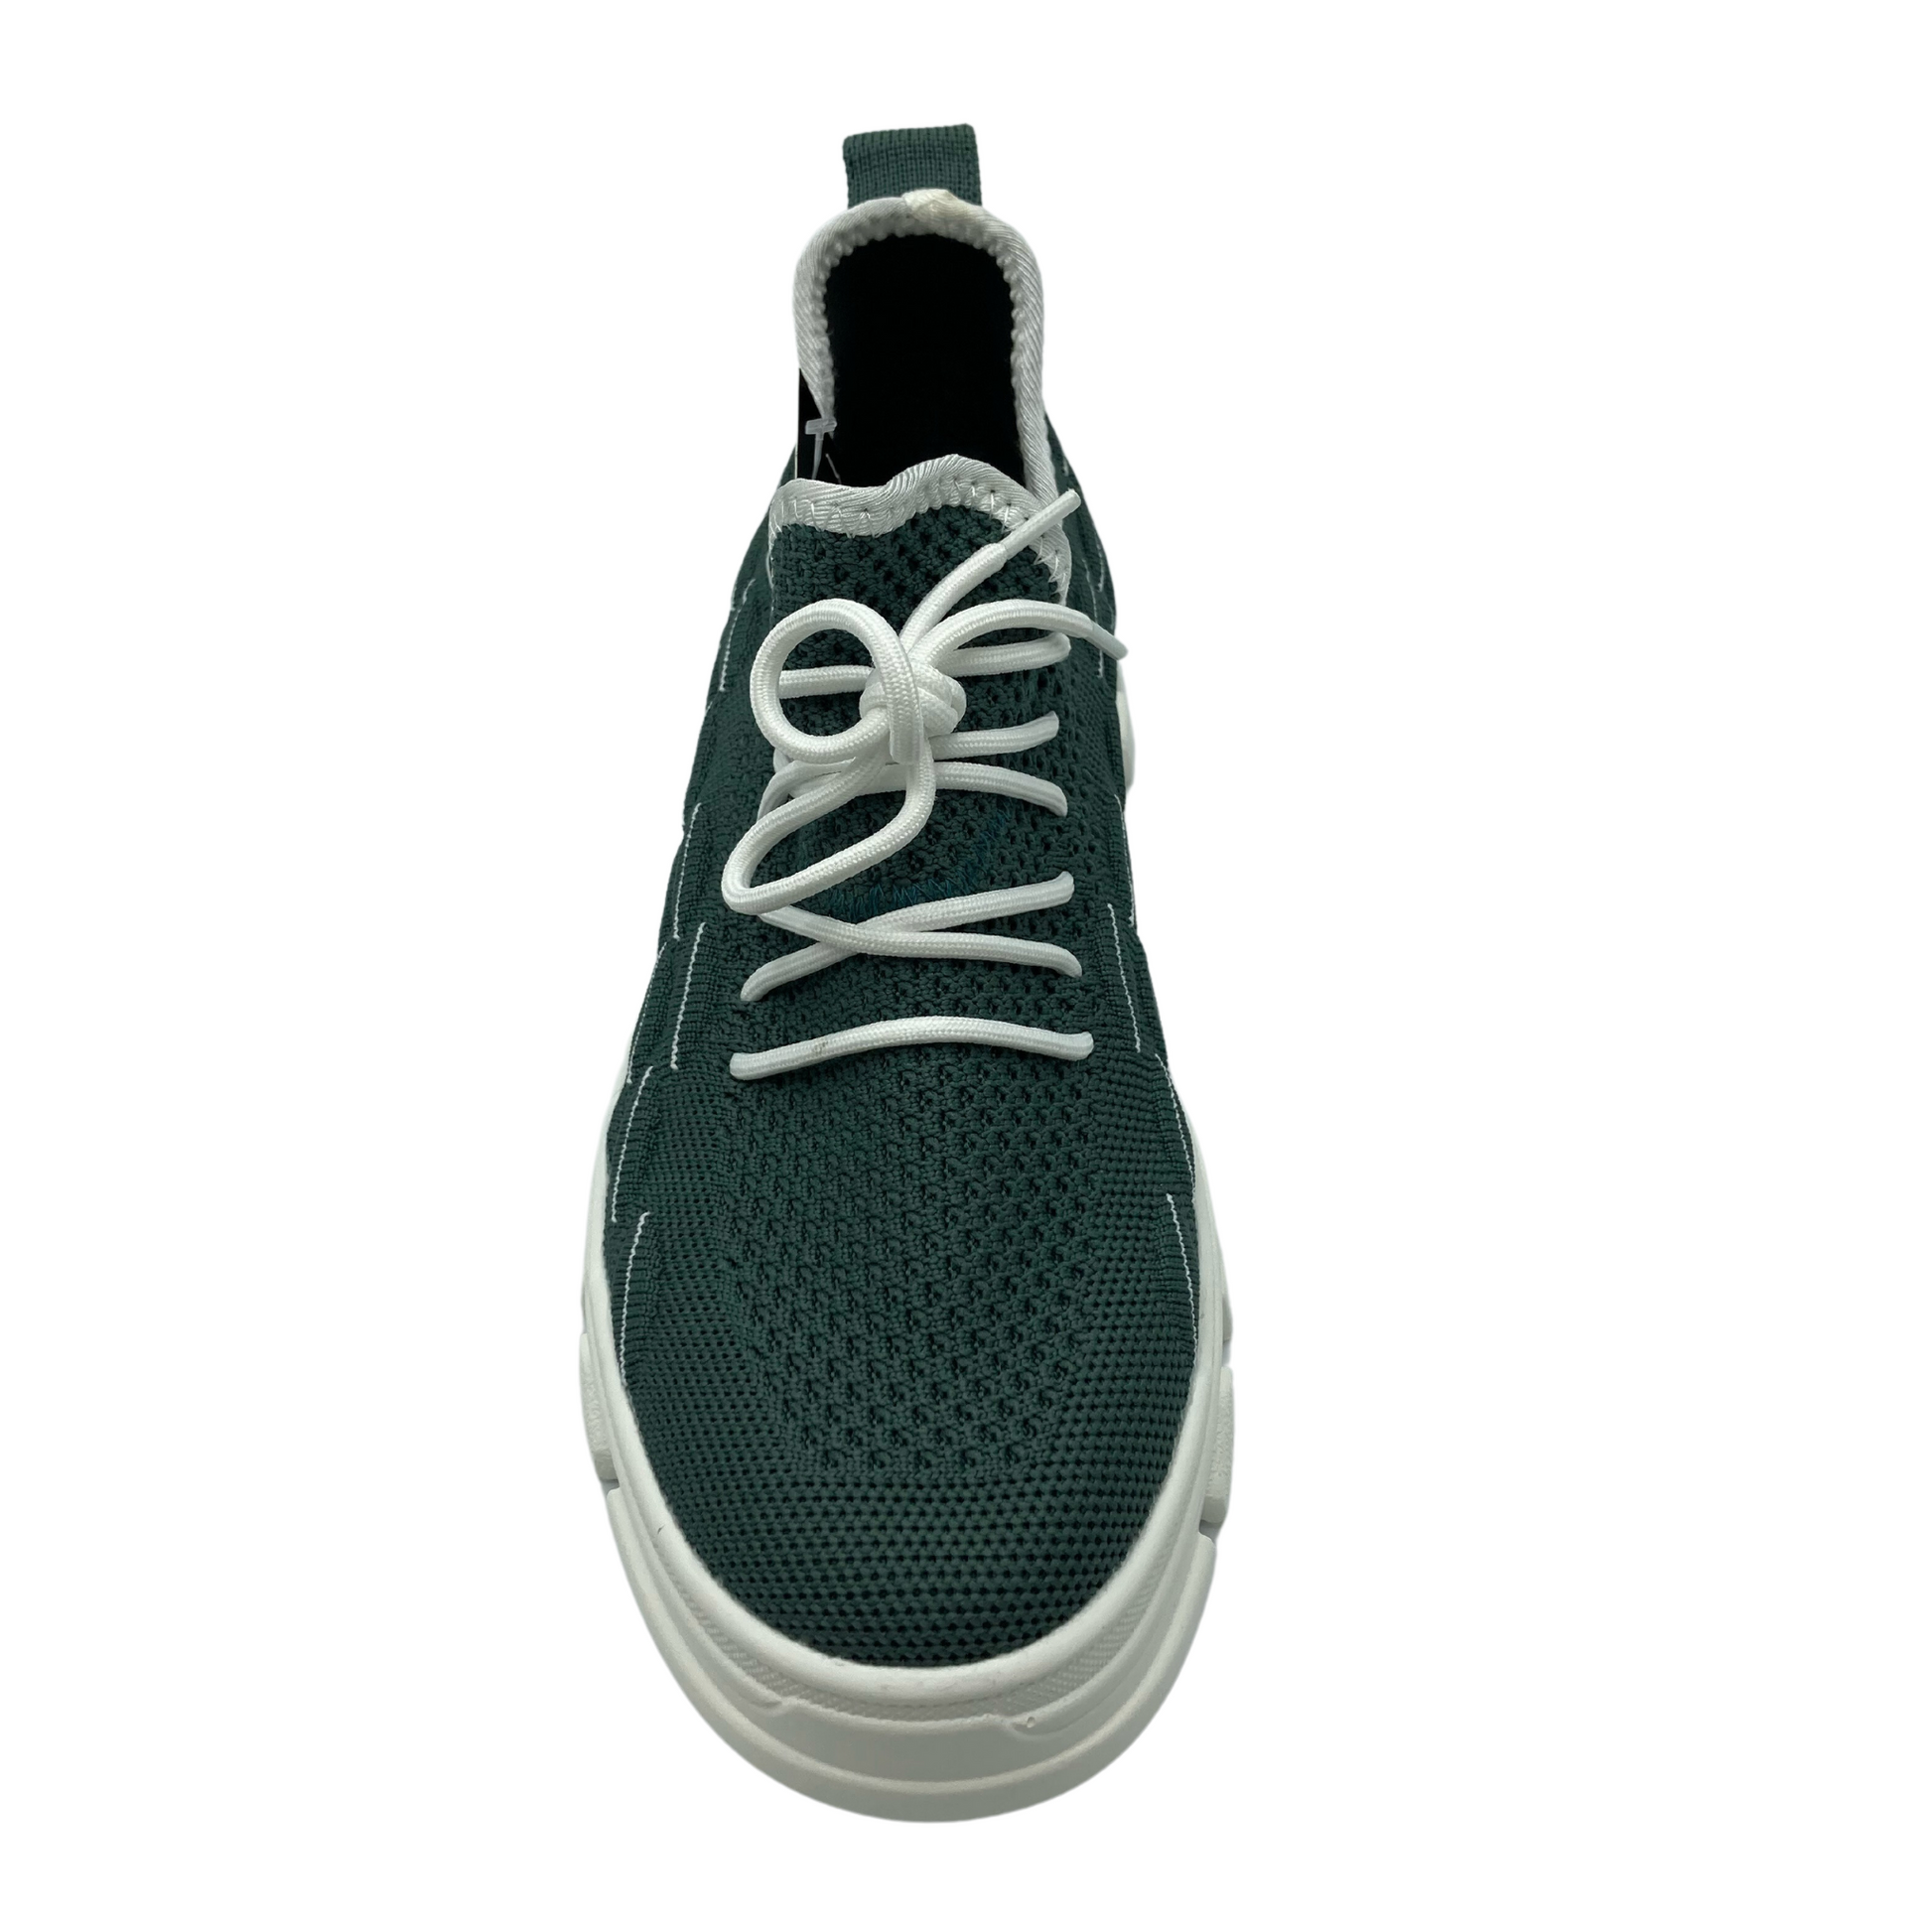 Top  view of pine mesh sneakers with white rubber lug sole